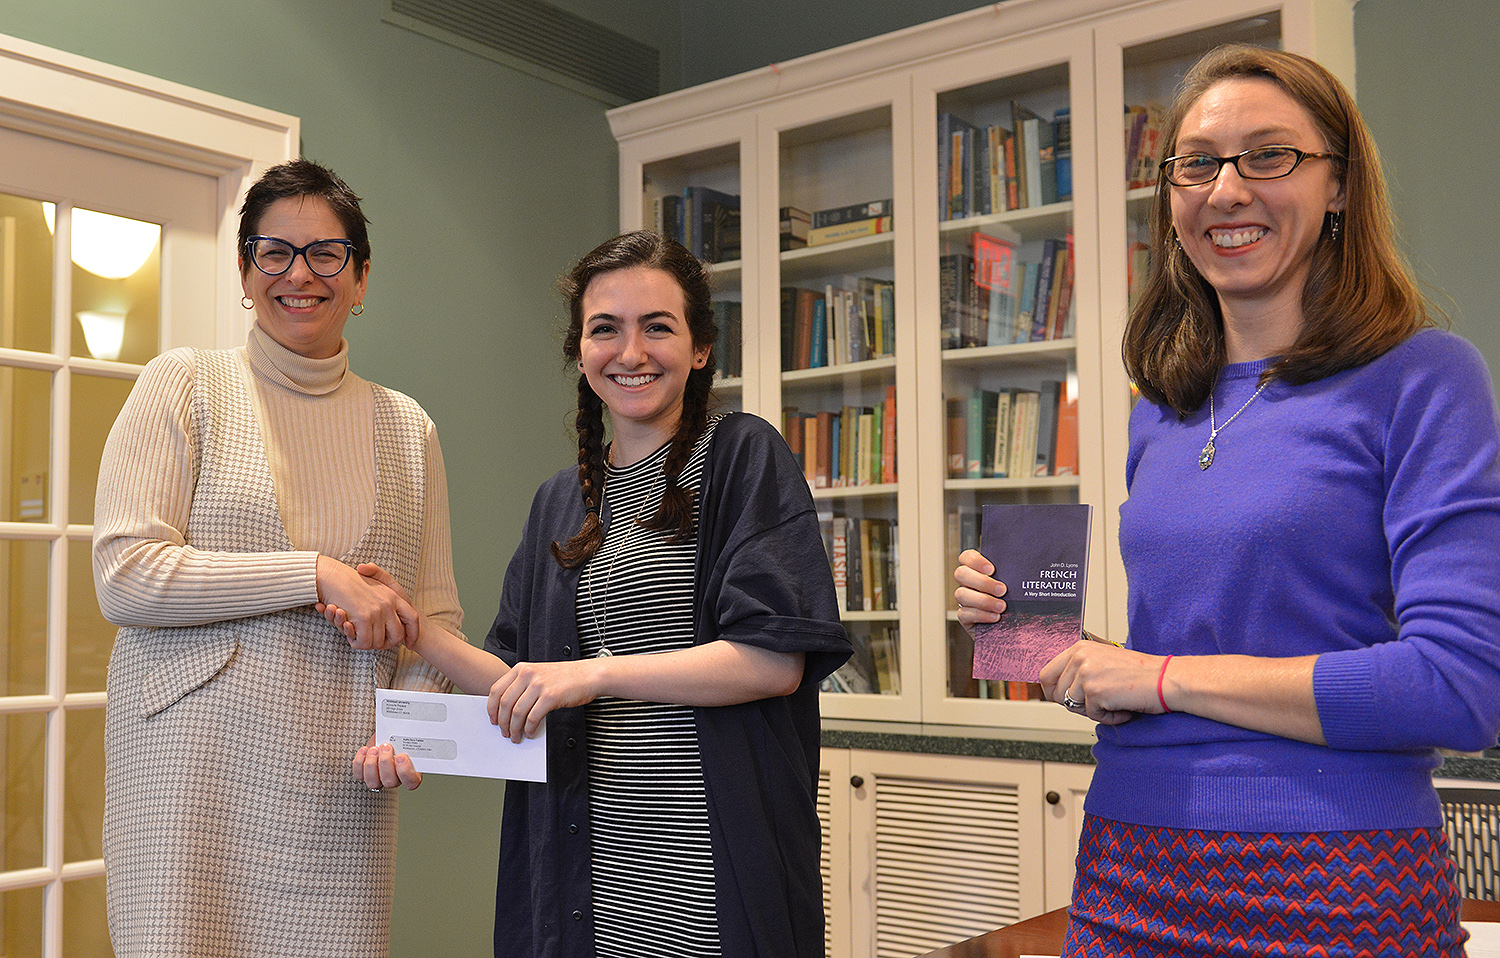 Sophia Dora Tulchin '20 took third place with her essay, “Subtleties of Subversion,” French in Translation 123 course, Love Sex, and Marriage in Renaissance Europe. The class was taught by Michael Meere, assistant professor of French.